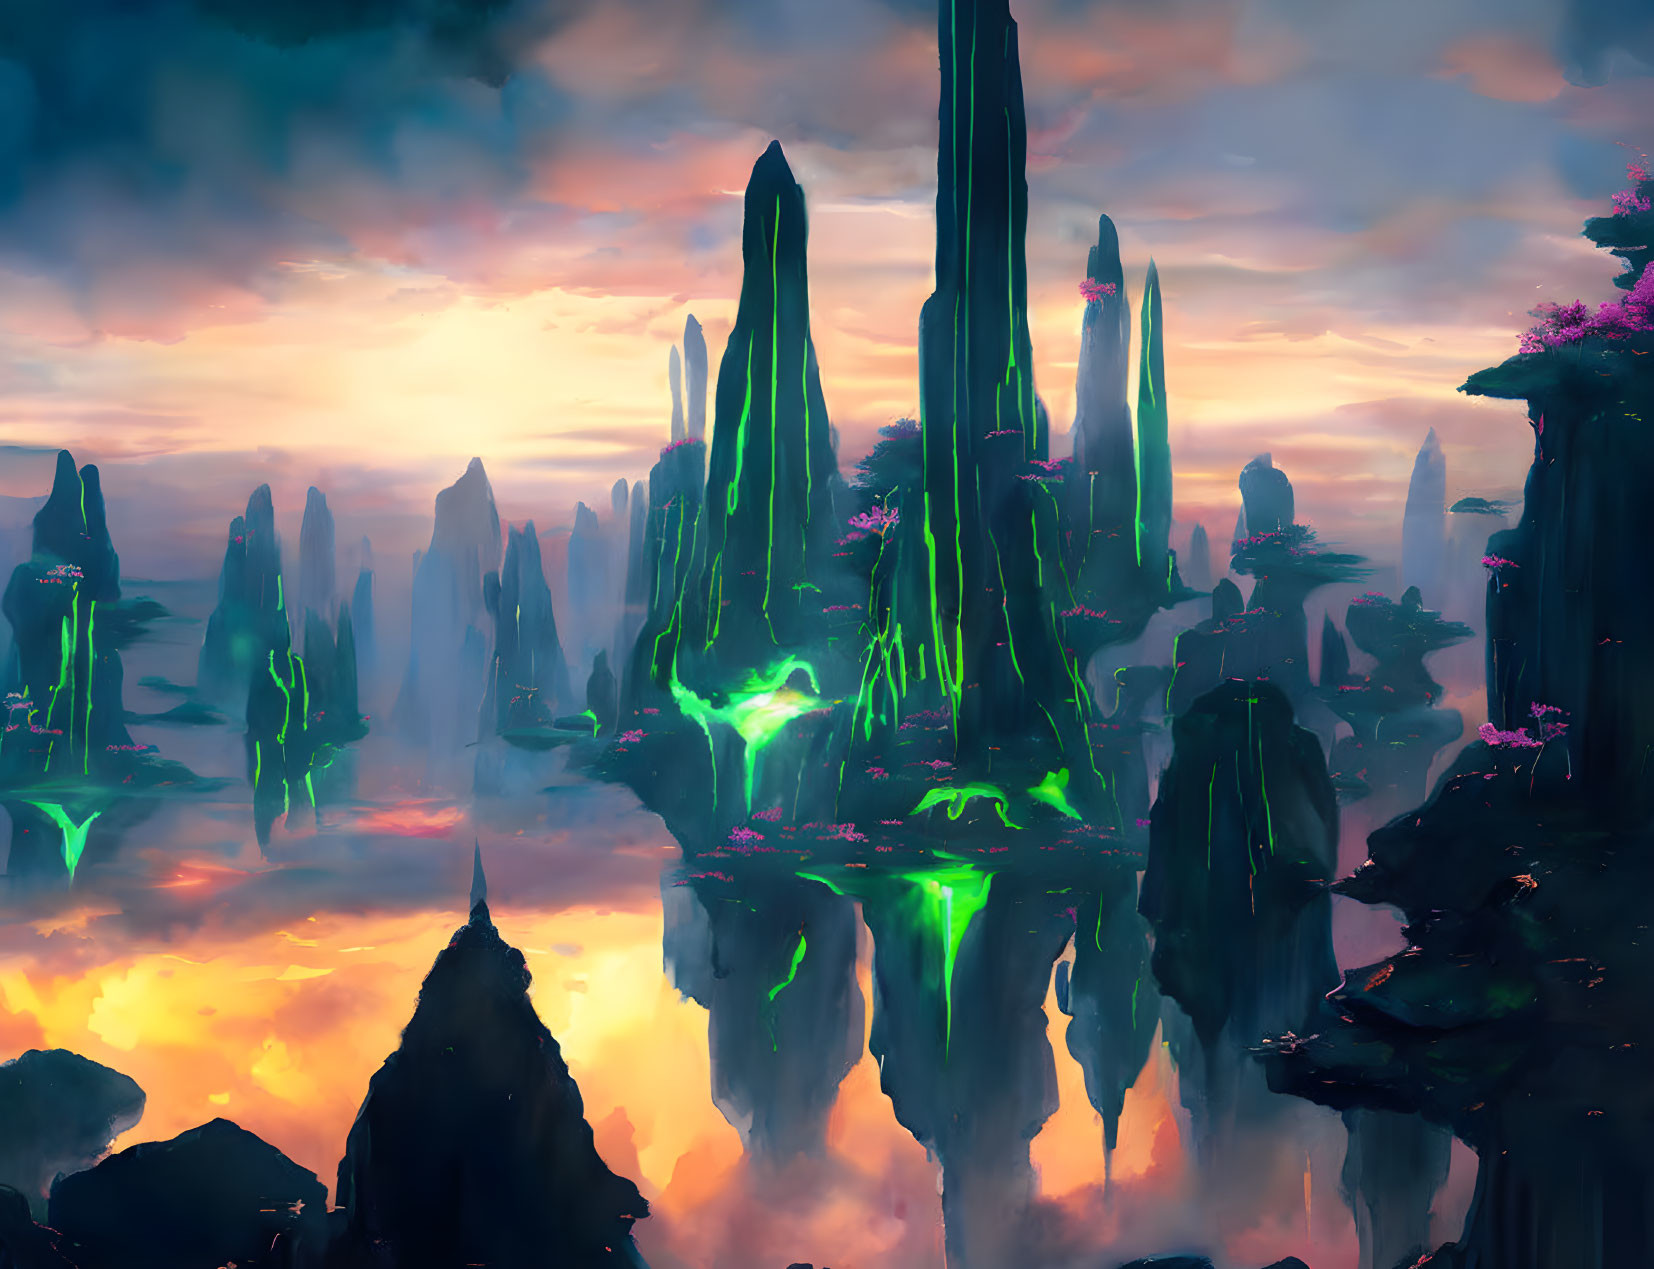 Fantastical landscape with glowing rock formations above lava.